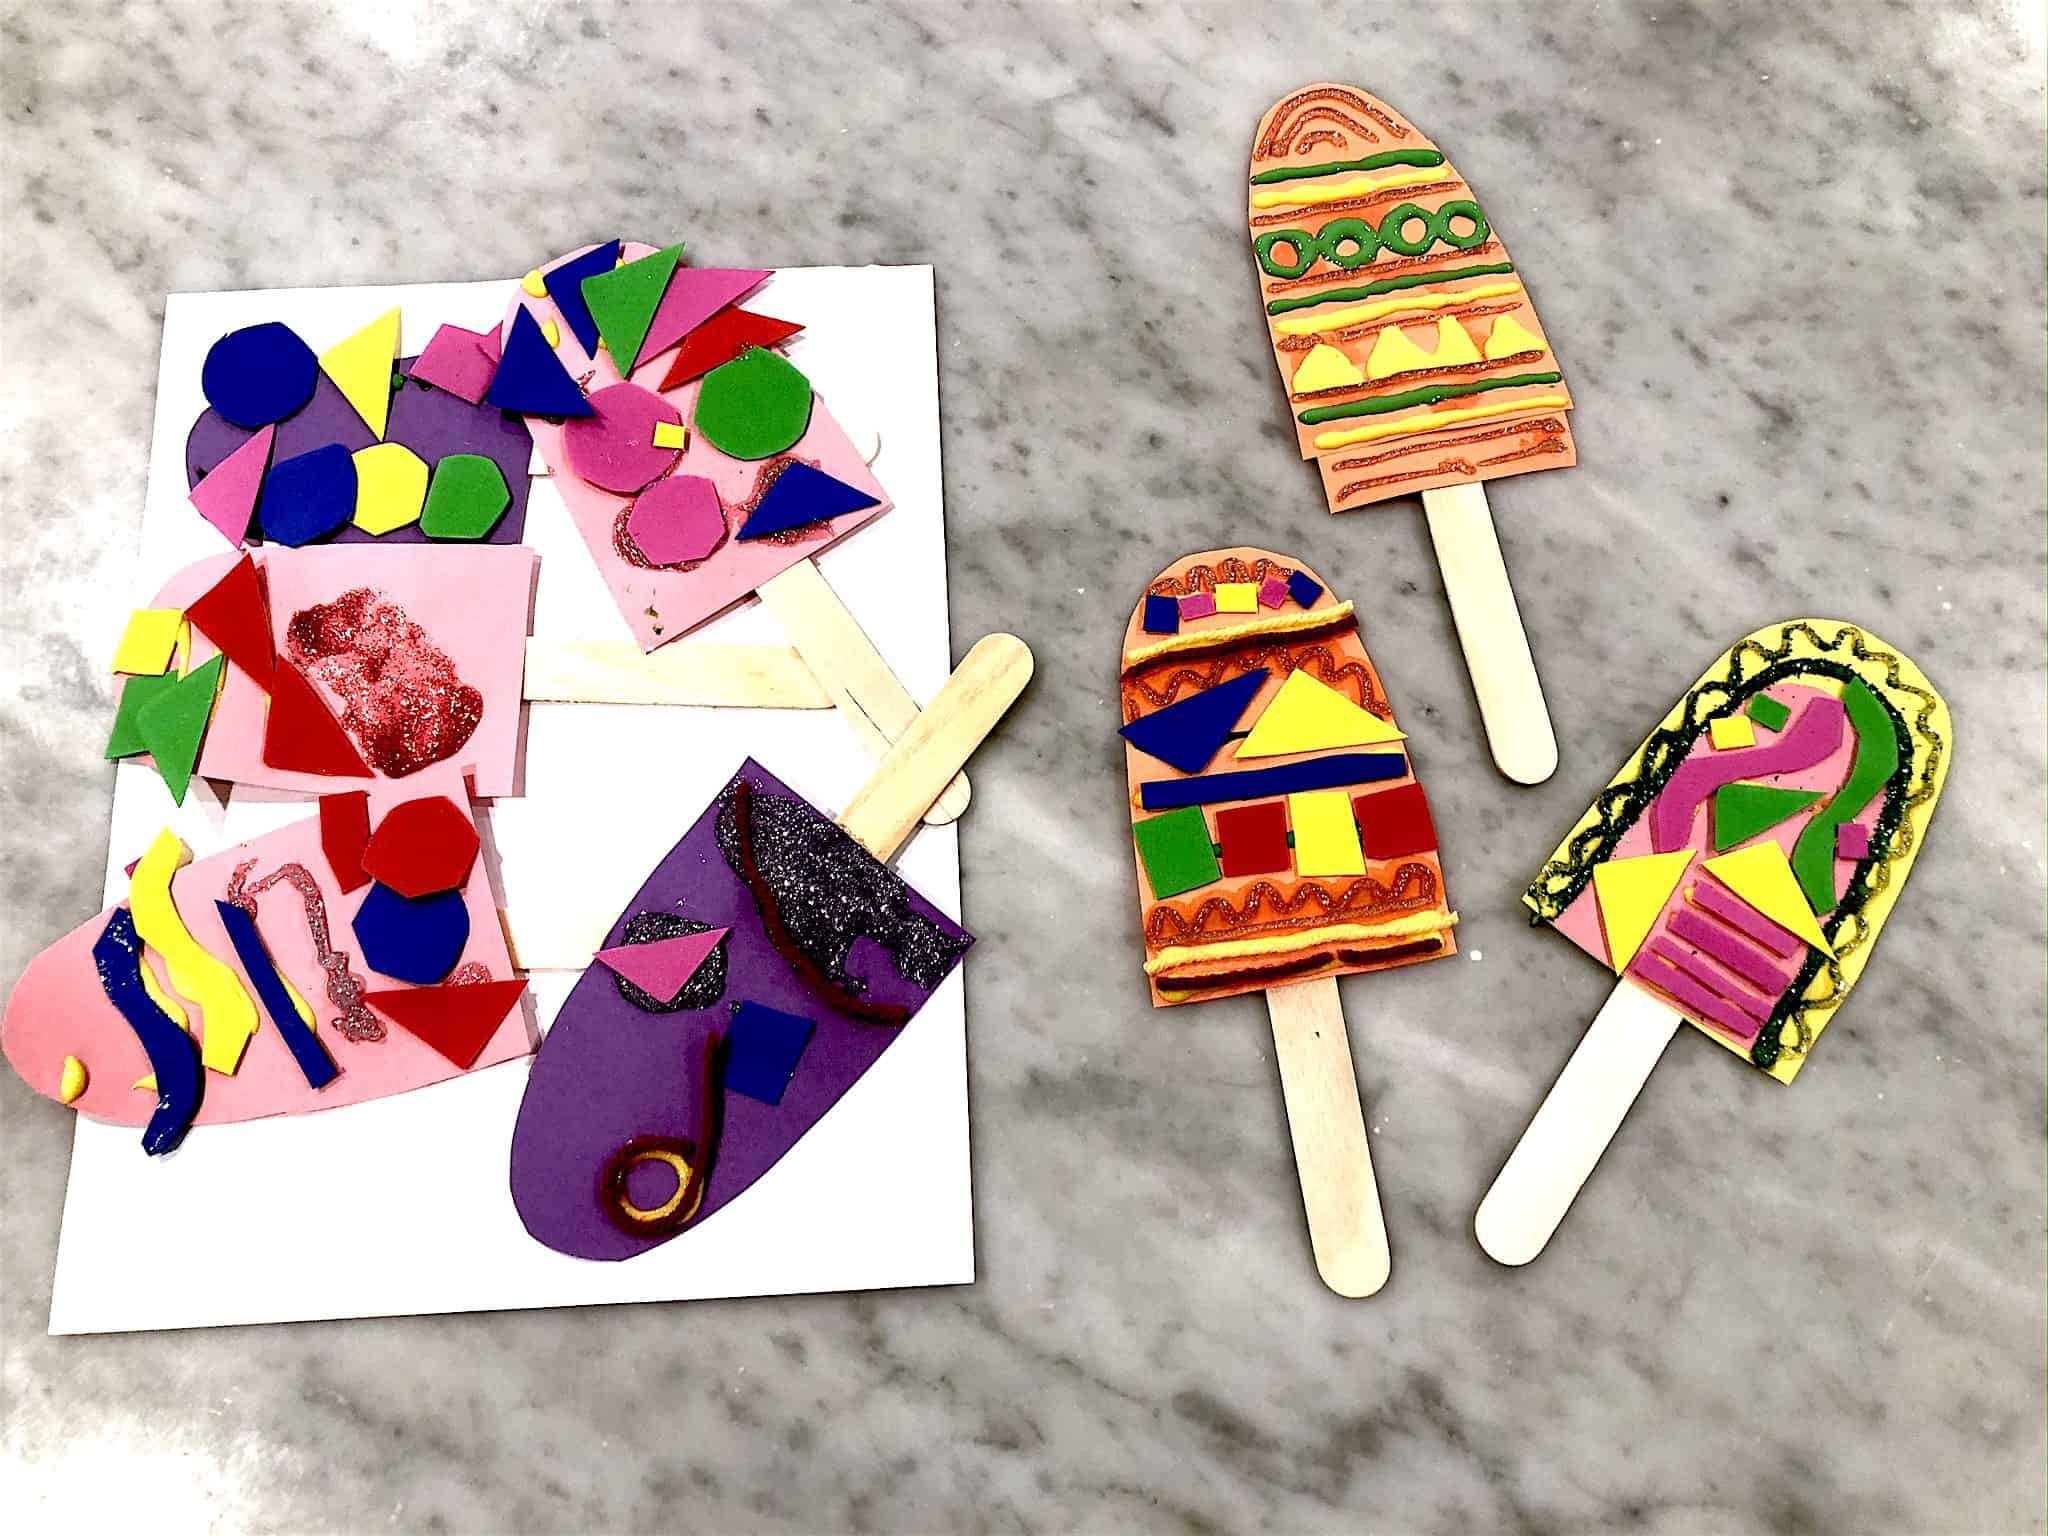 30+ Creative Popsicle Stick Crafts and Activities for Kids - From